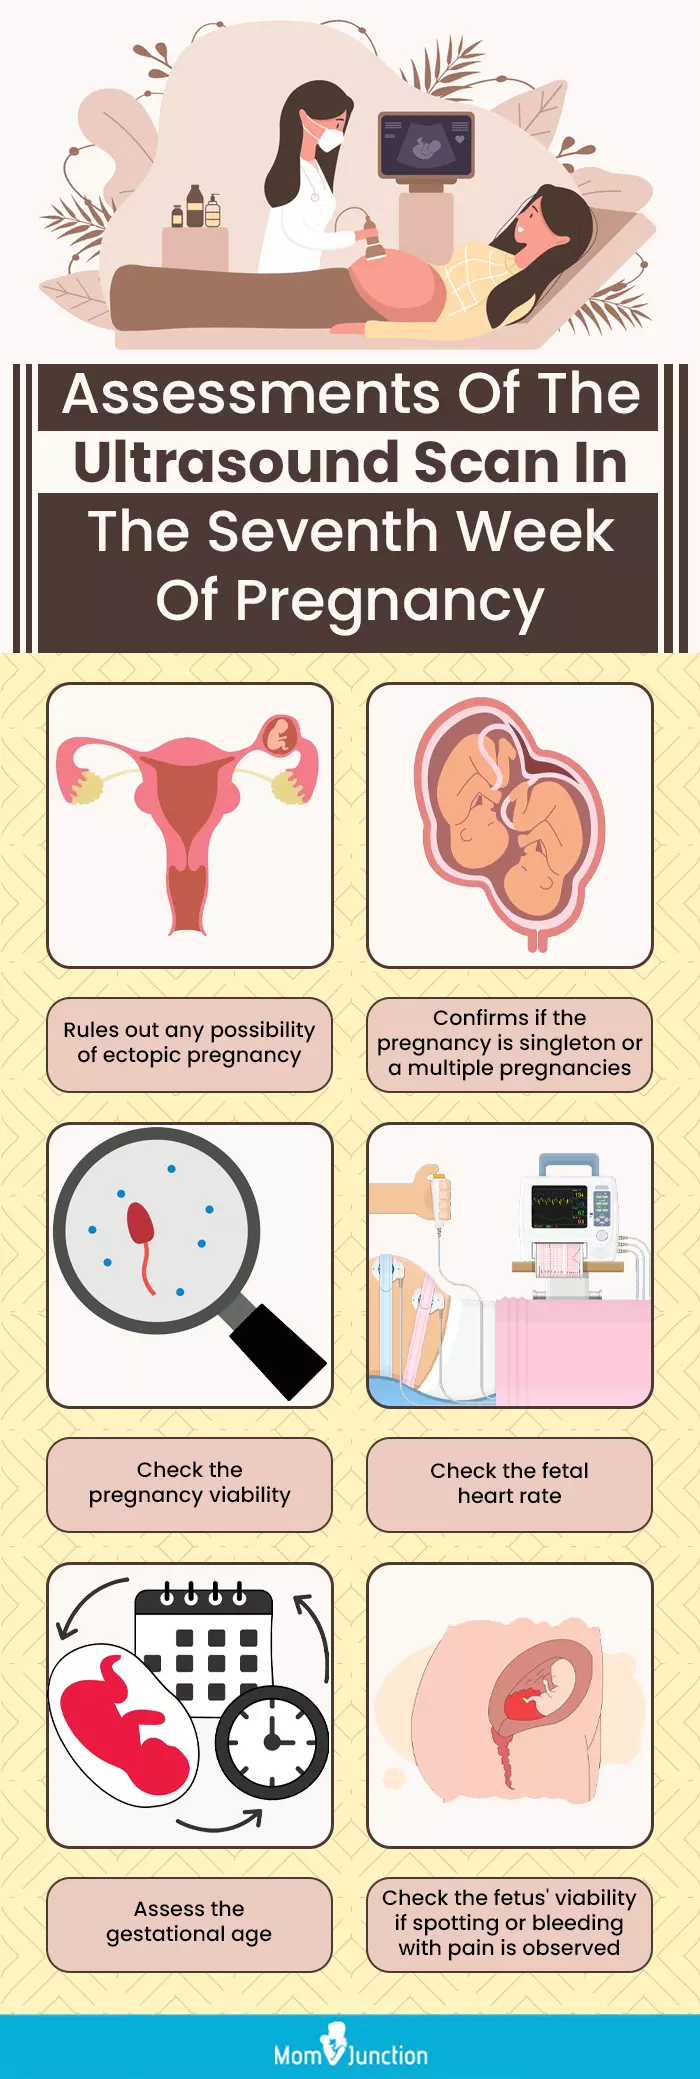 assessments of the ultrasound scan in the seventh week of pregnancy (infographic)